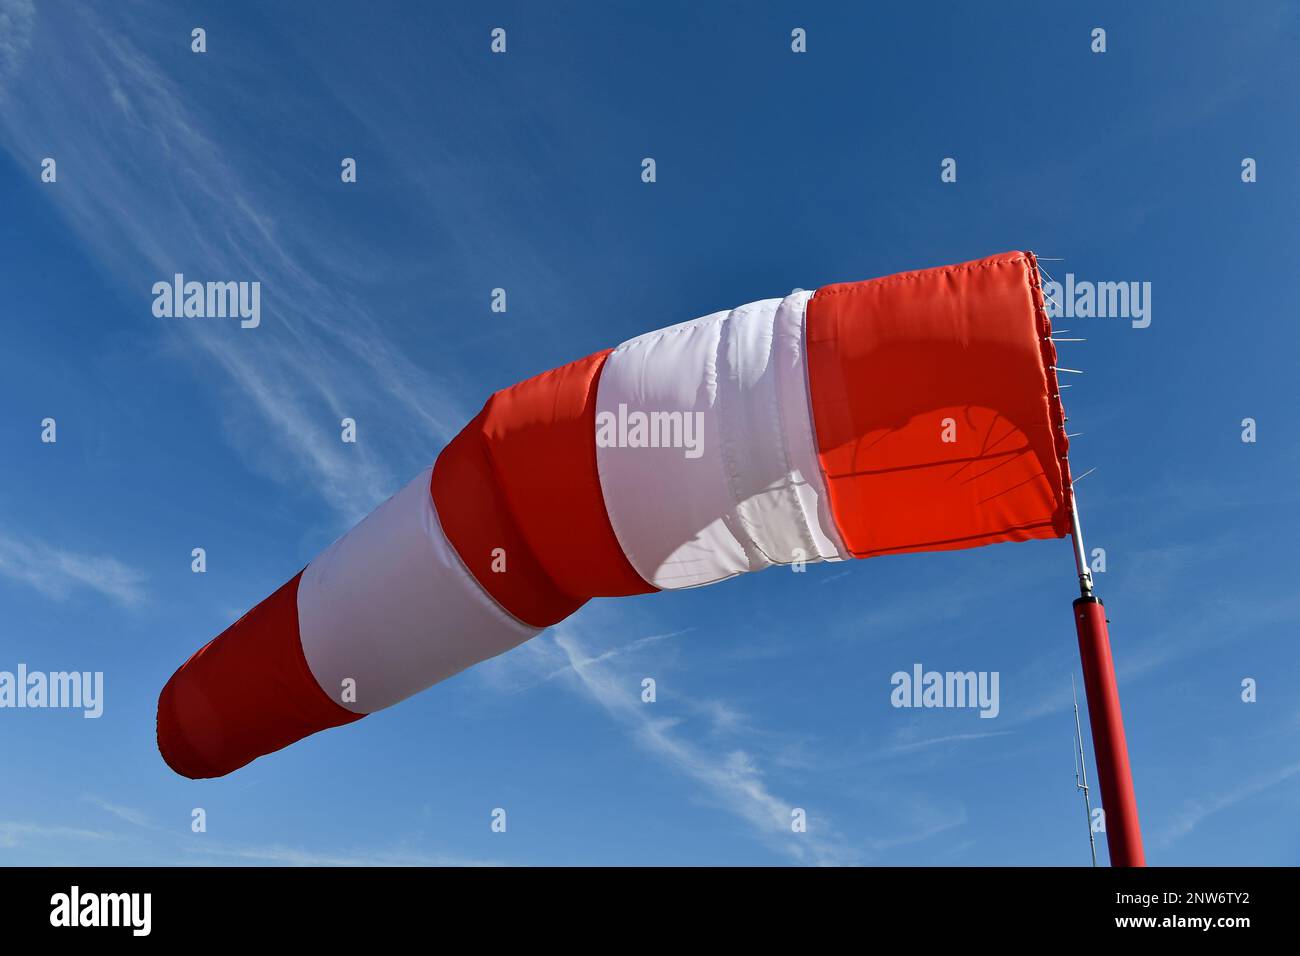 wind direction indicator, windy, Wind, Storm, Weather, Flag, Banner, sign, crosswind, Aviation, Airport, Bavaria, Germany Stock Photo